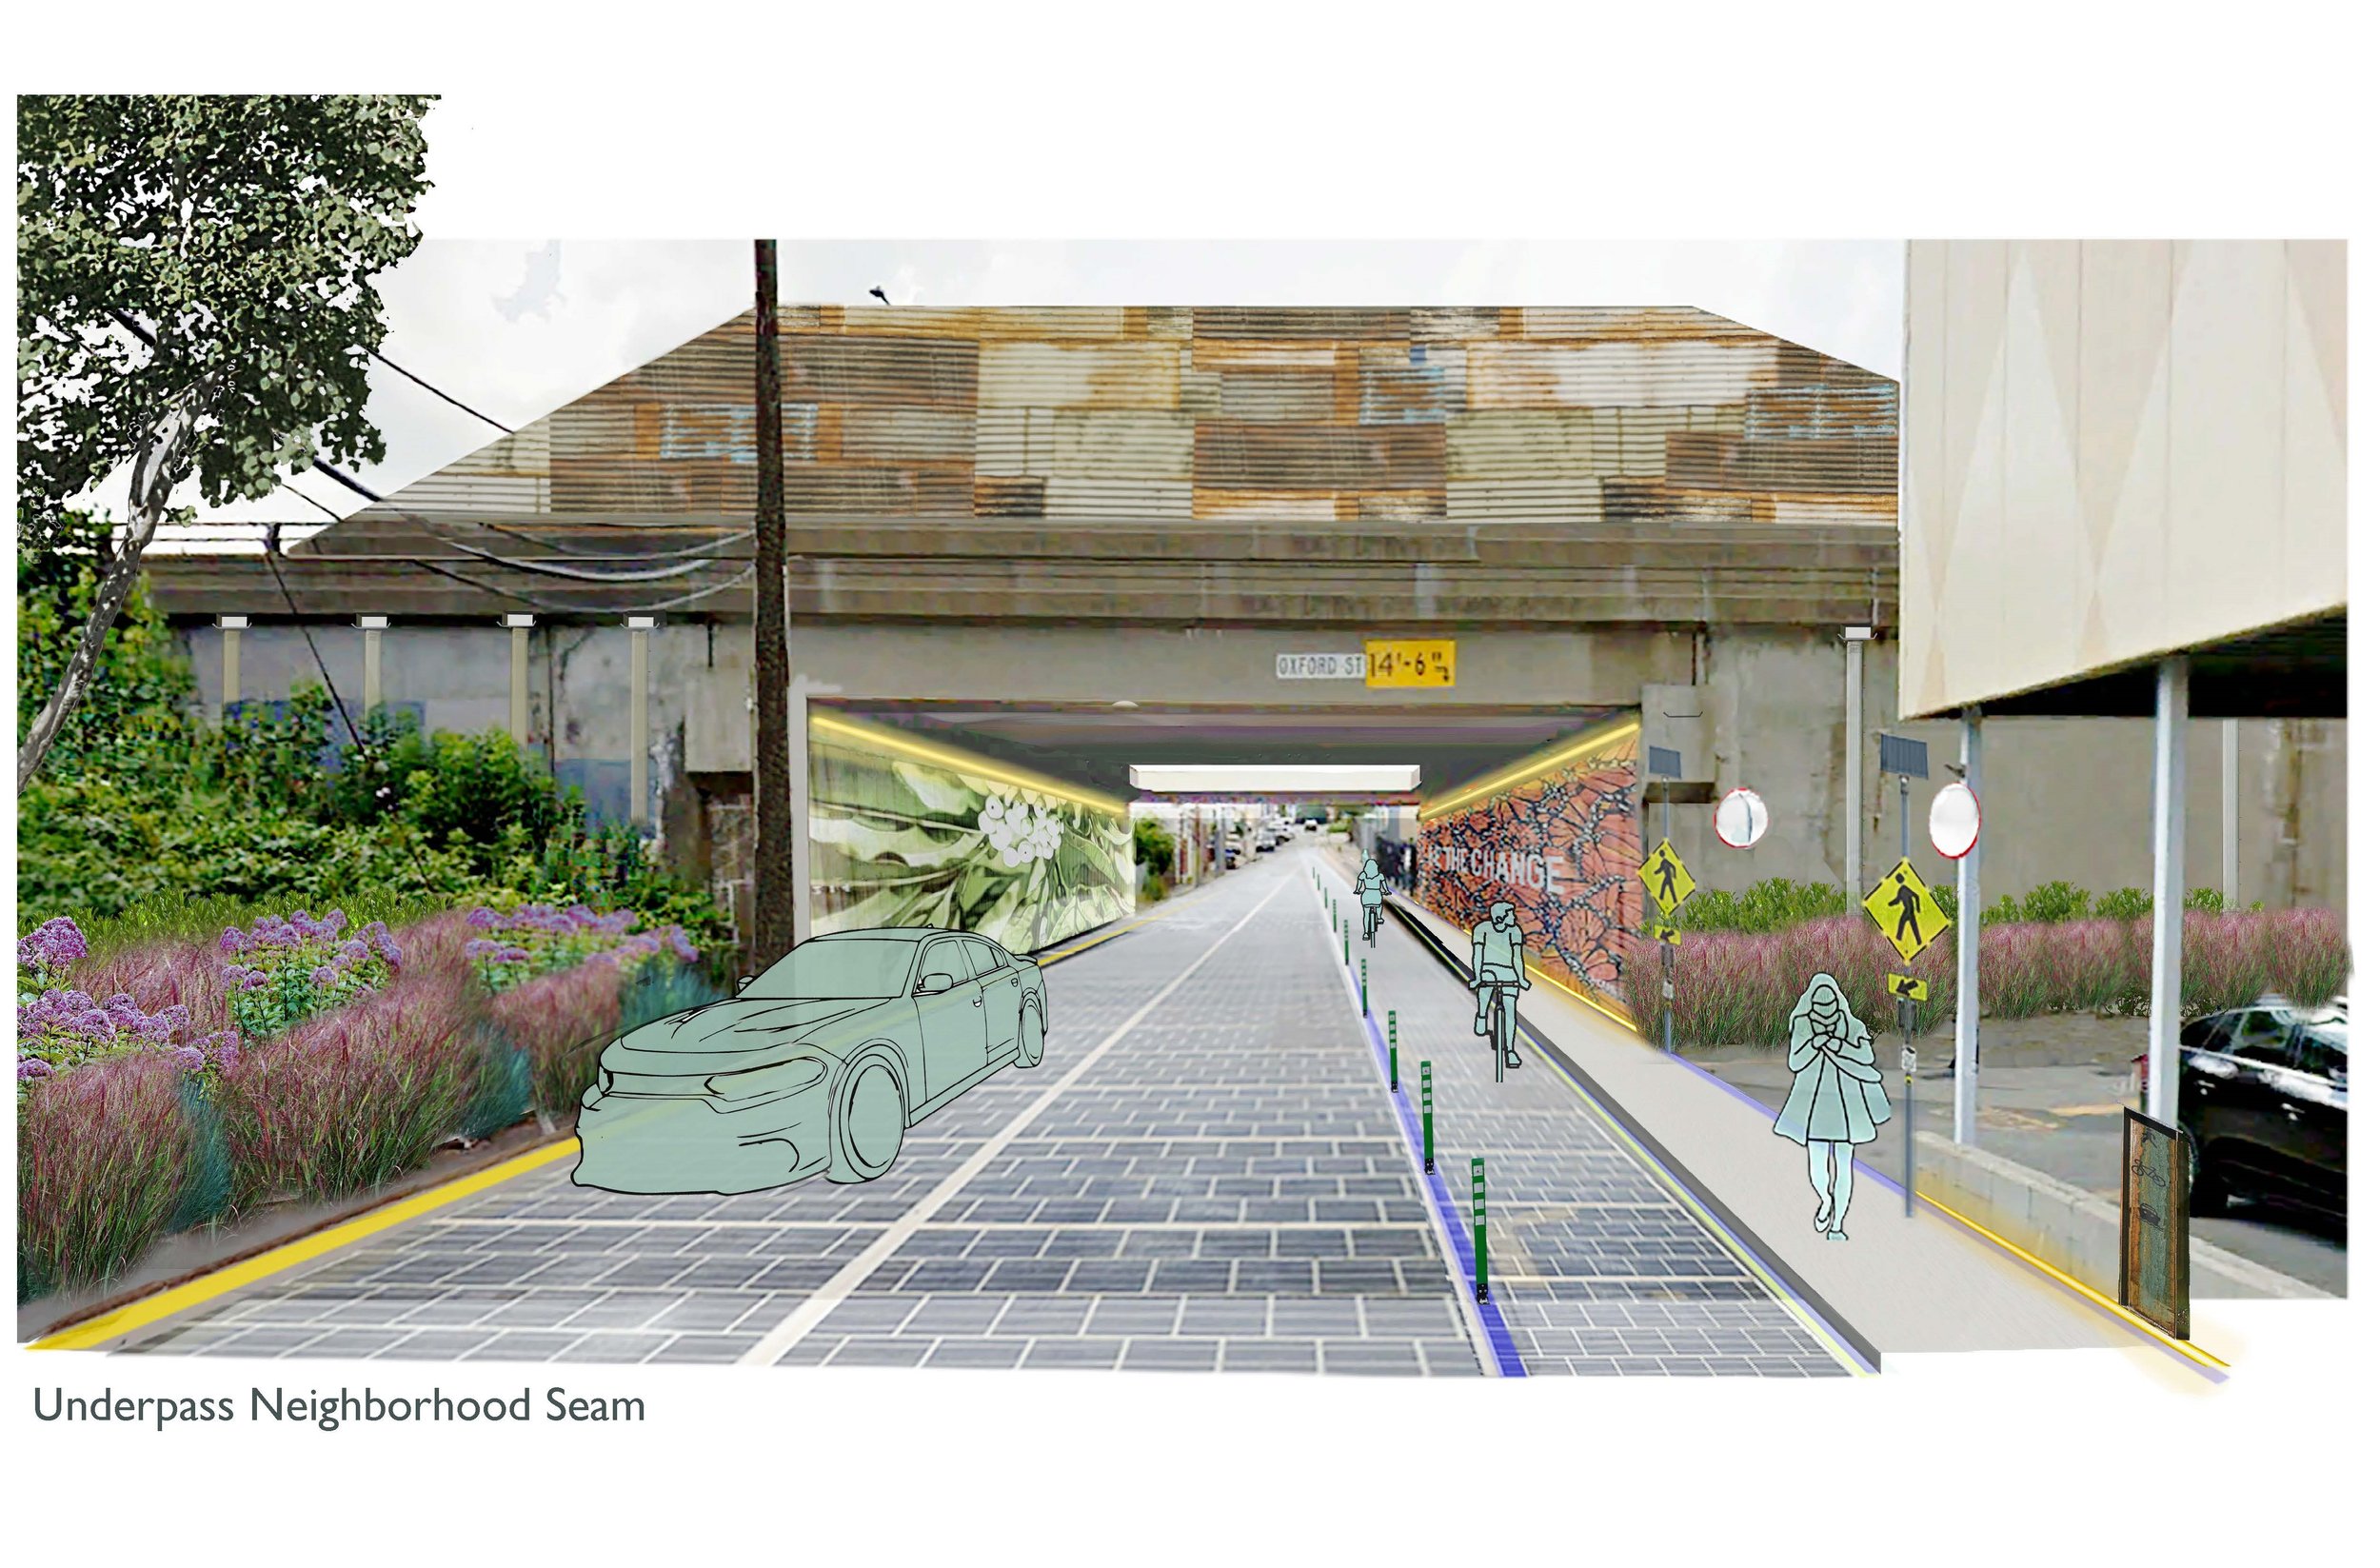  Underpass Neighborhood Seam in Providence by Nora Masler of Northeastern School of Architecture  